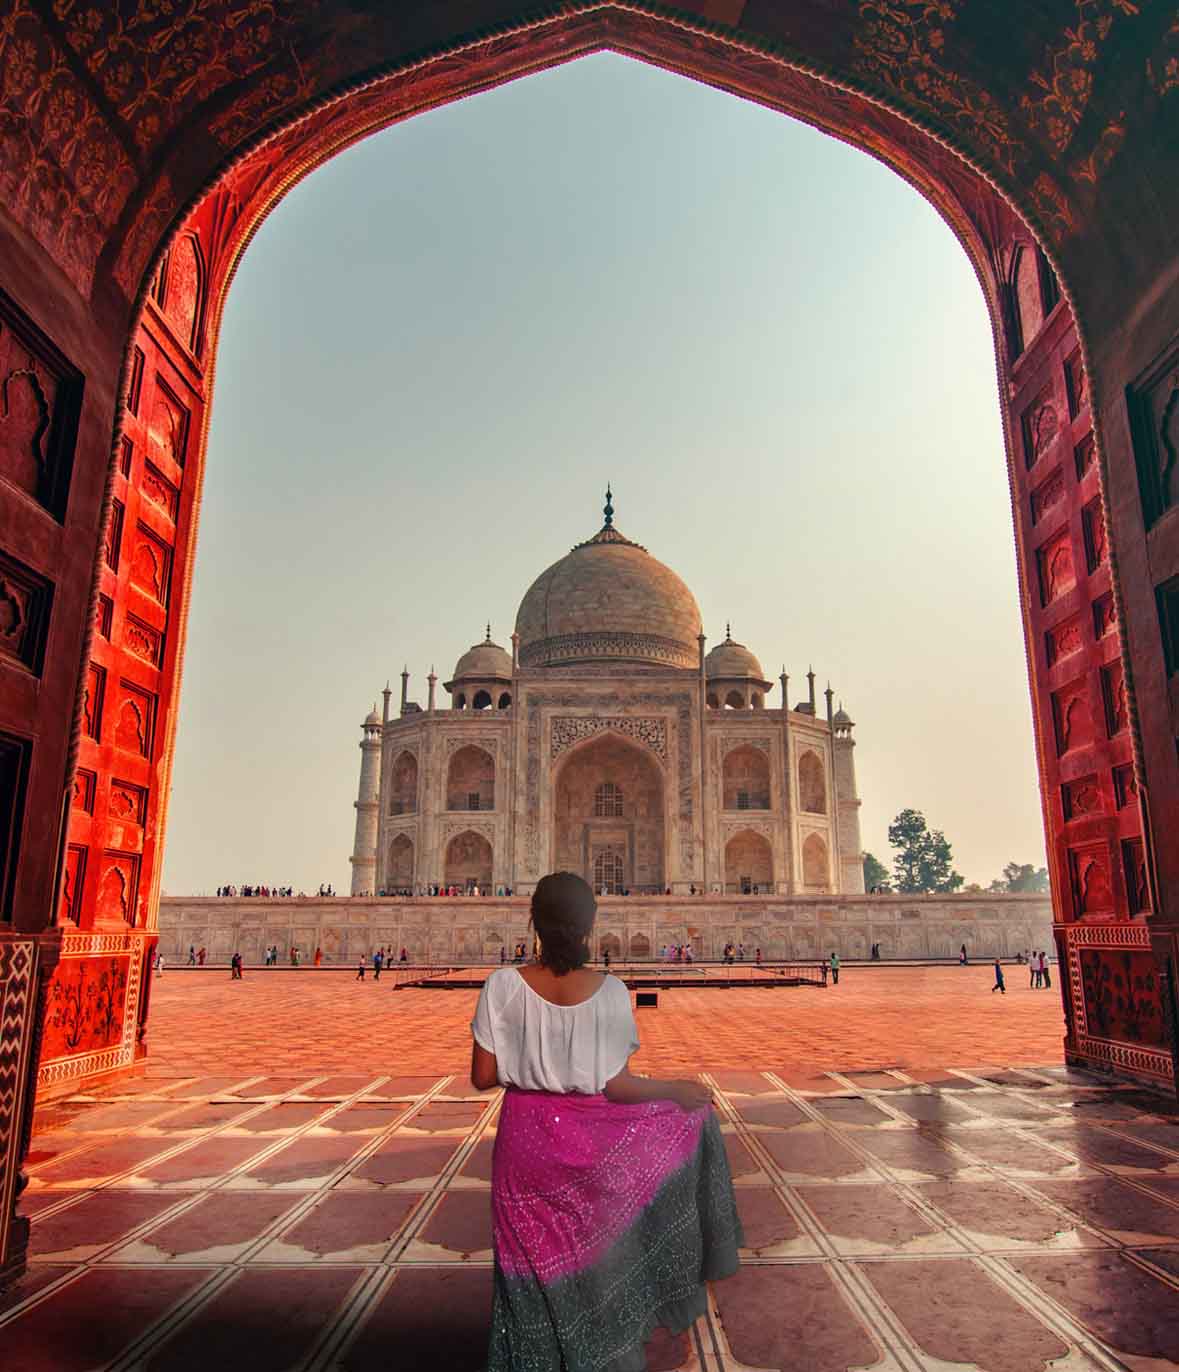 A lady twirls in front of the Taj Mahal, the UNESCO Heritage site of India during her Motorcycle tour to India on Diwali